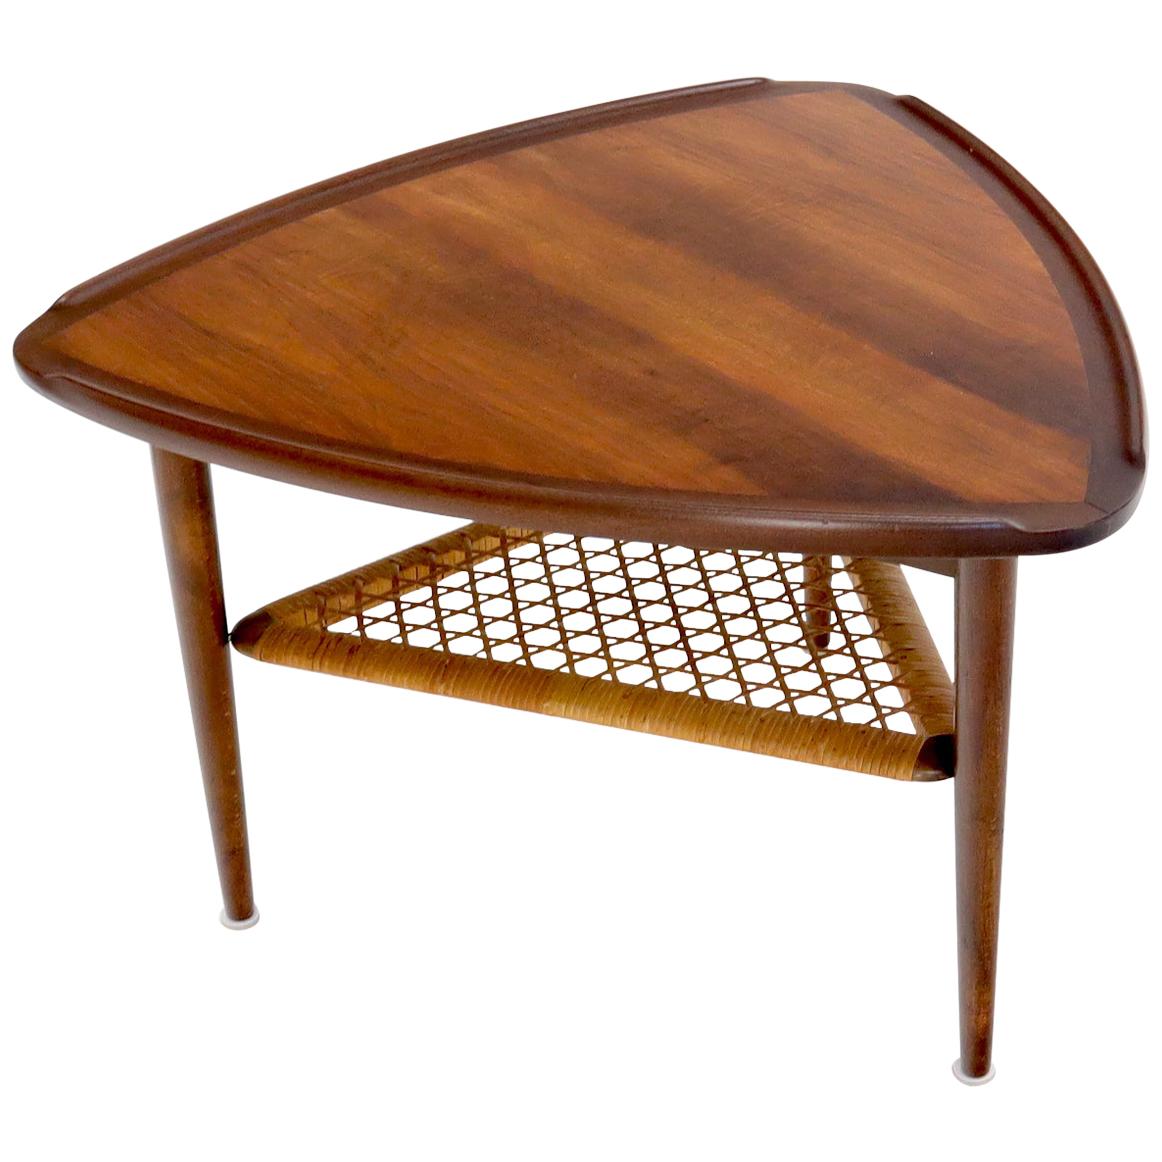 Rounded Triangular Shape Danish Mid-Century Modern Side Occasional Table Cane